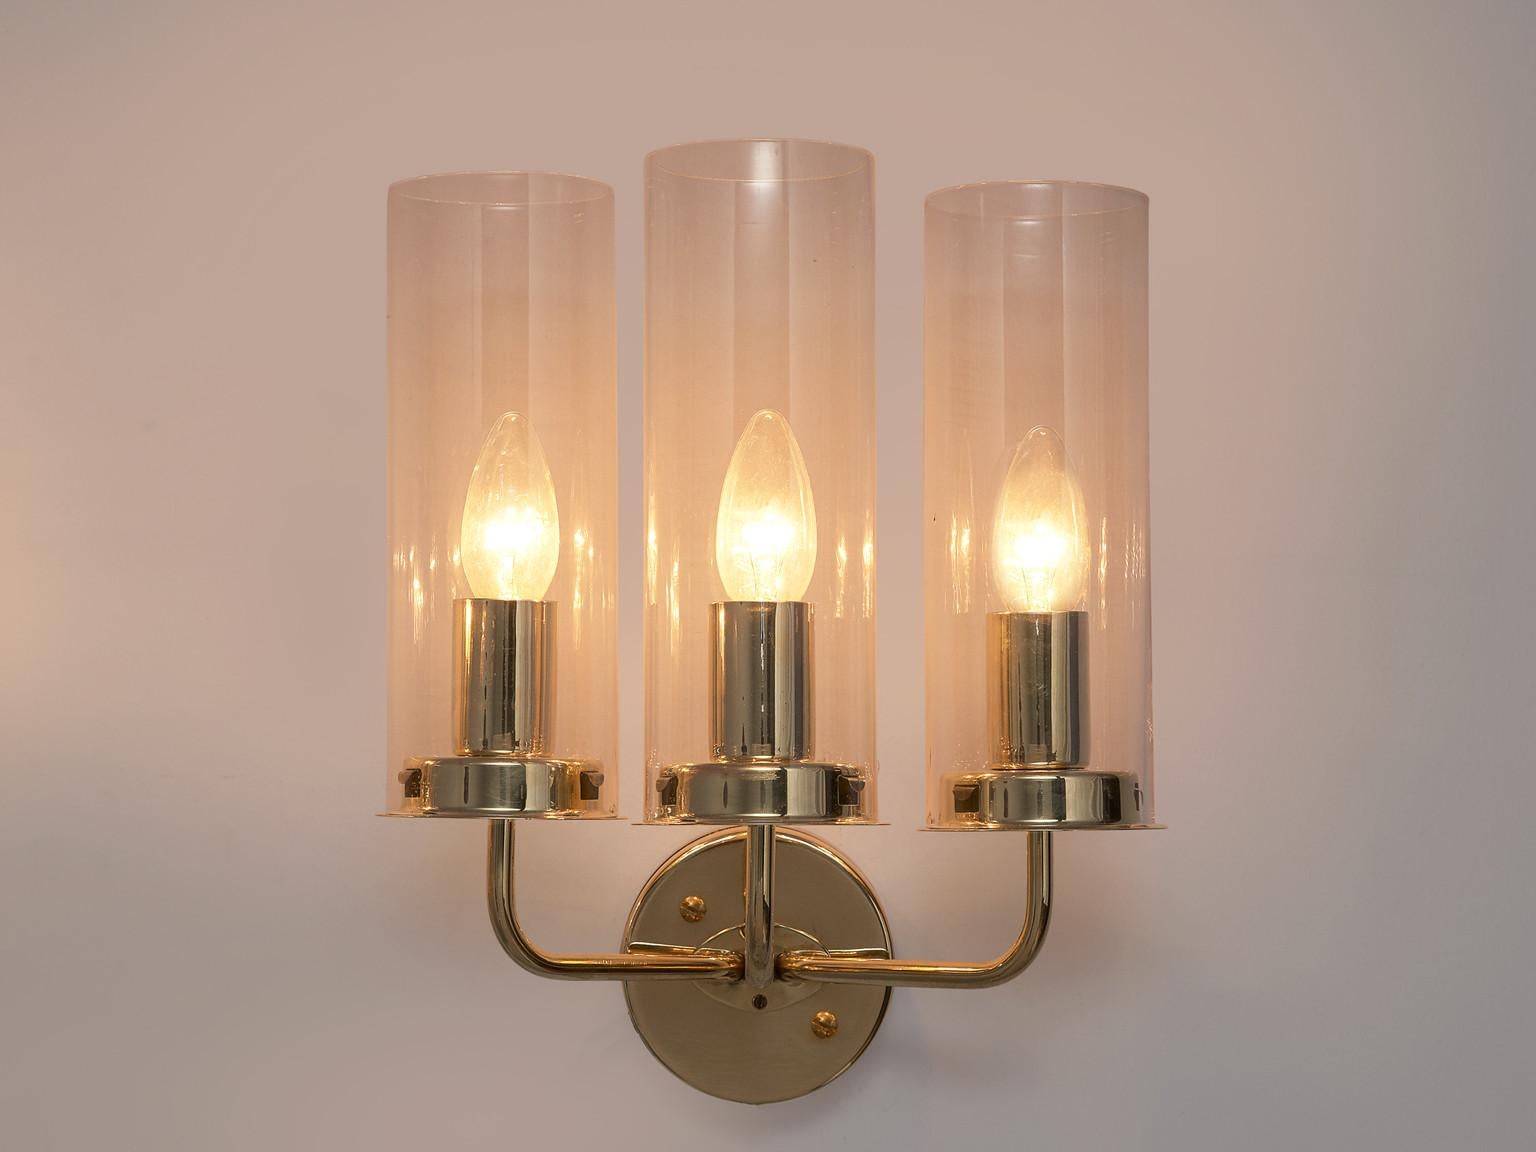 Hans-Agne Jakobsson 'Sonata' Wall Lights in Glass and Brass